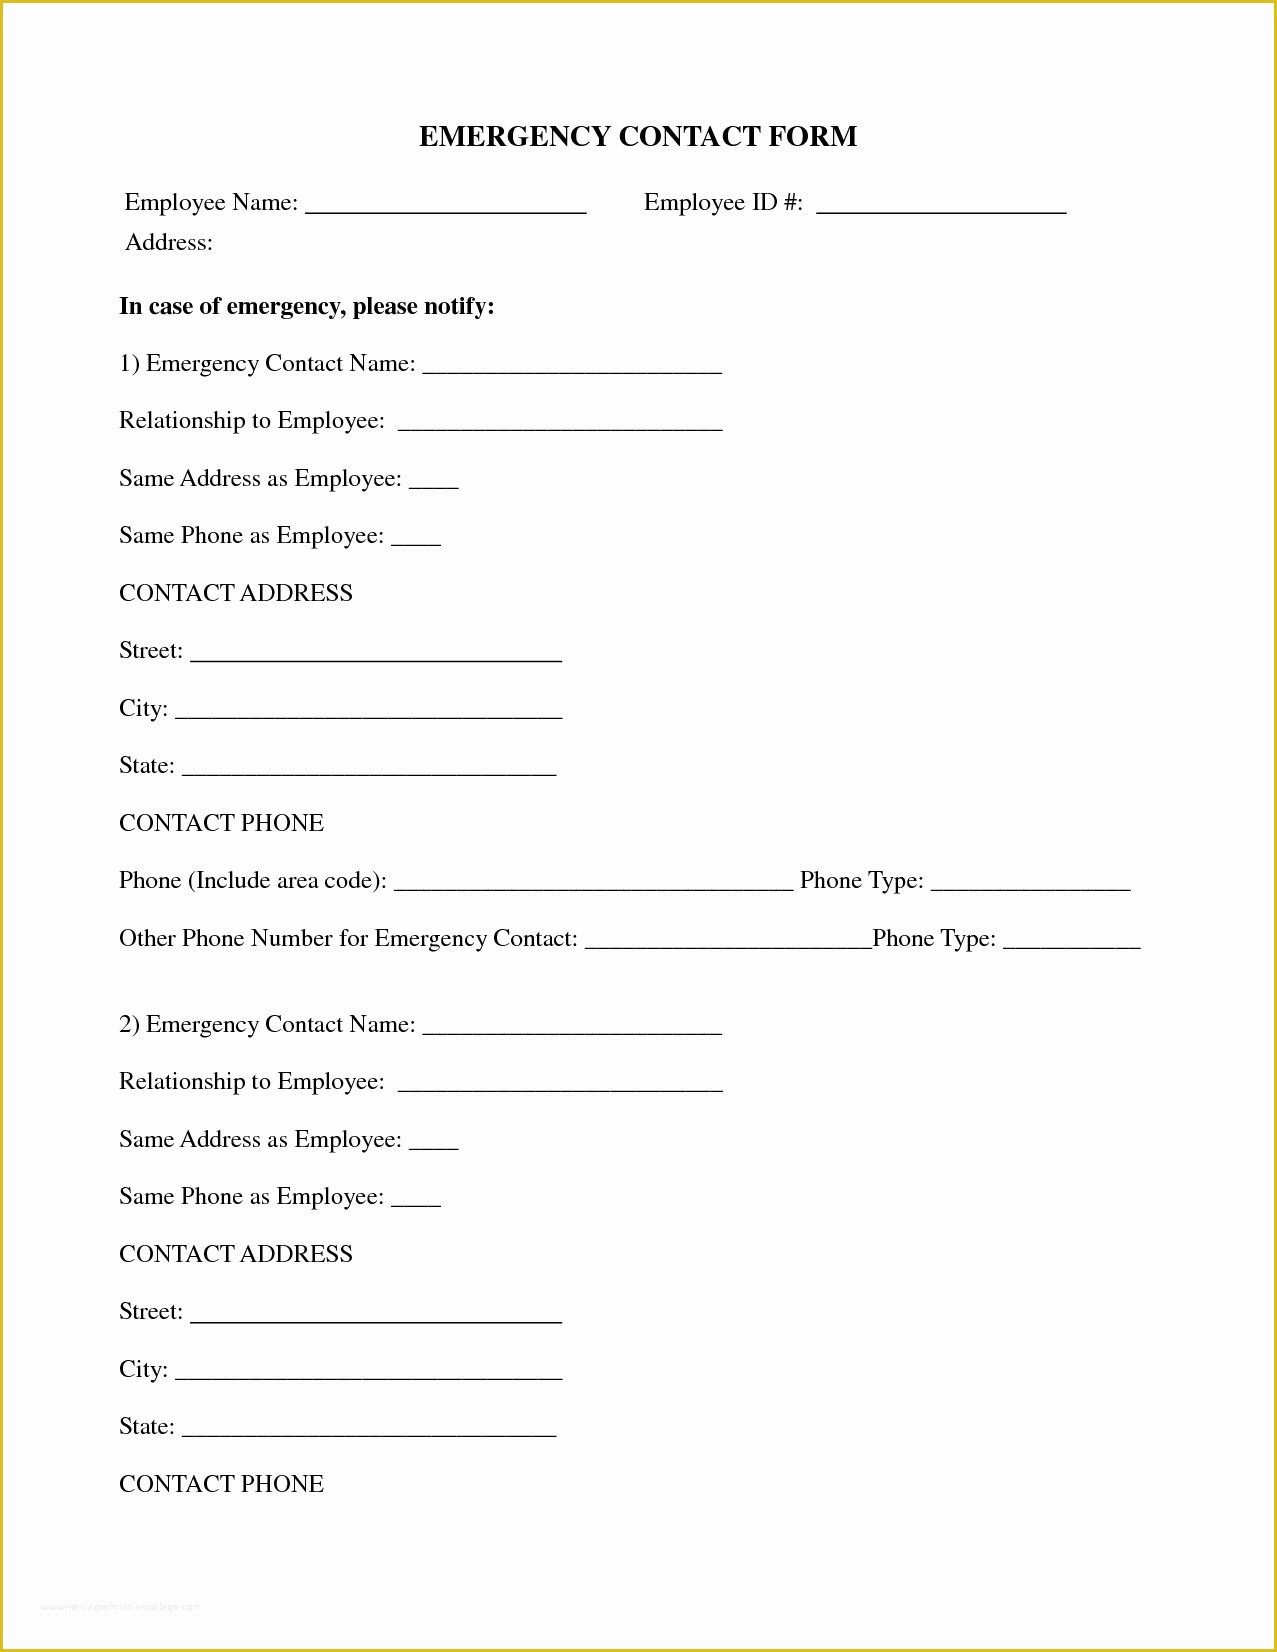 Free Emergency Contact form Template for Employees Of Employee Emergency Contact Printable form to Pin